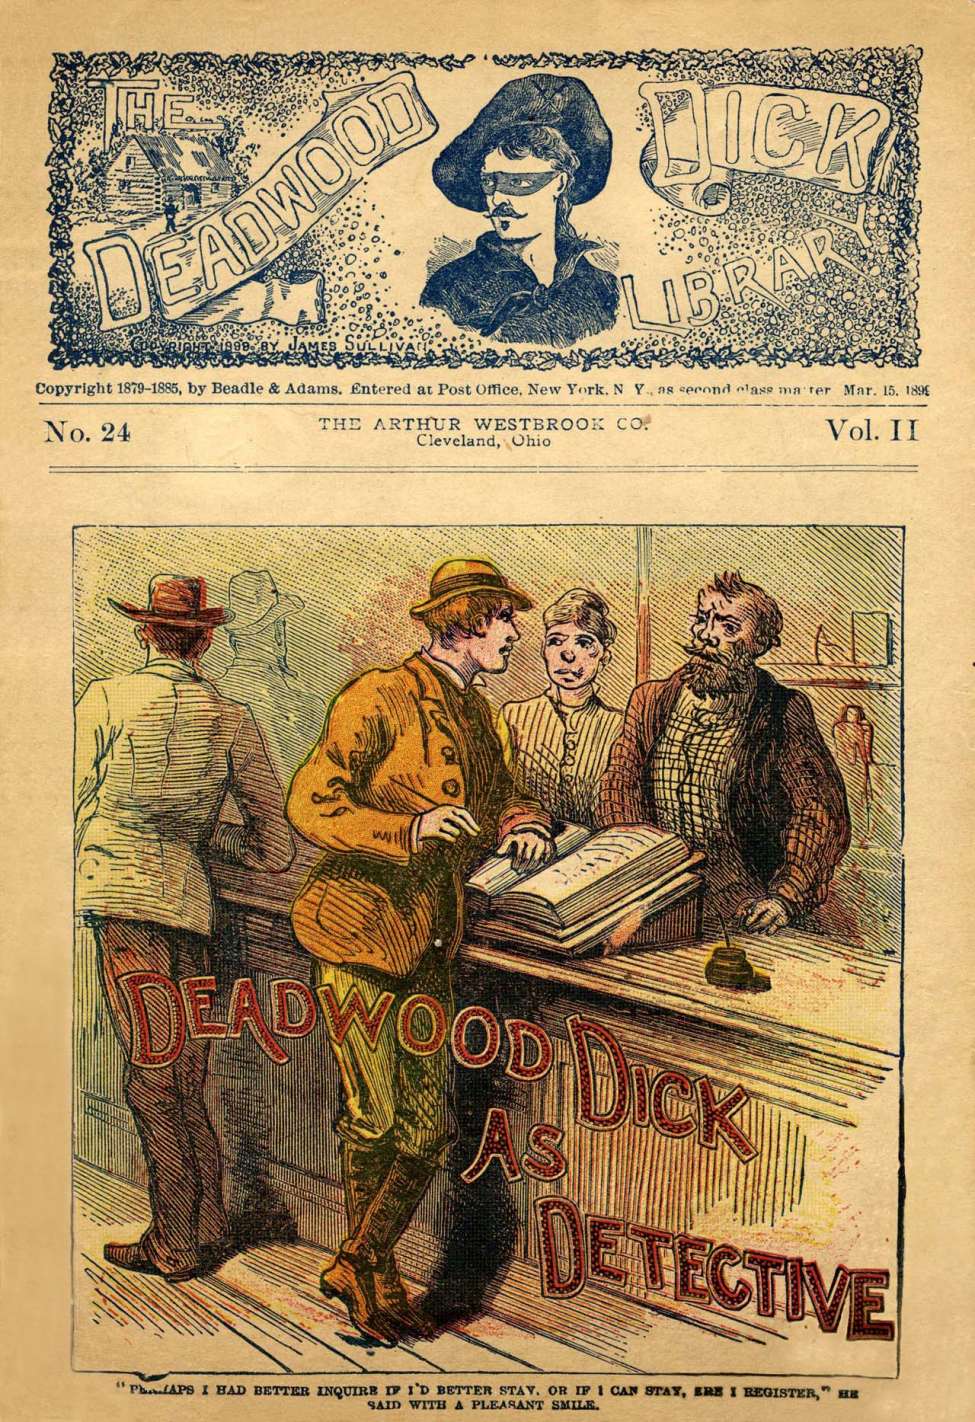 Comic Book Cover For Deadwood Dick Library v2 24 - Deadwood Dick as Detective